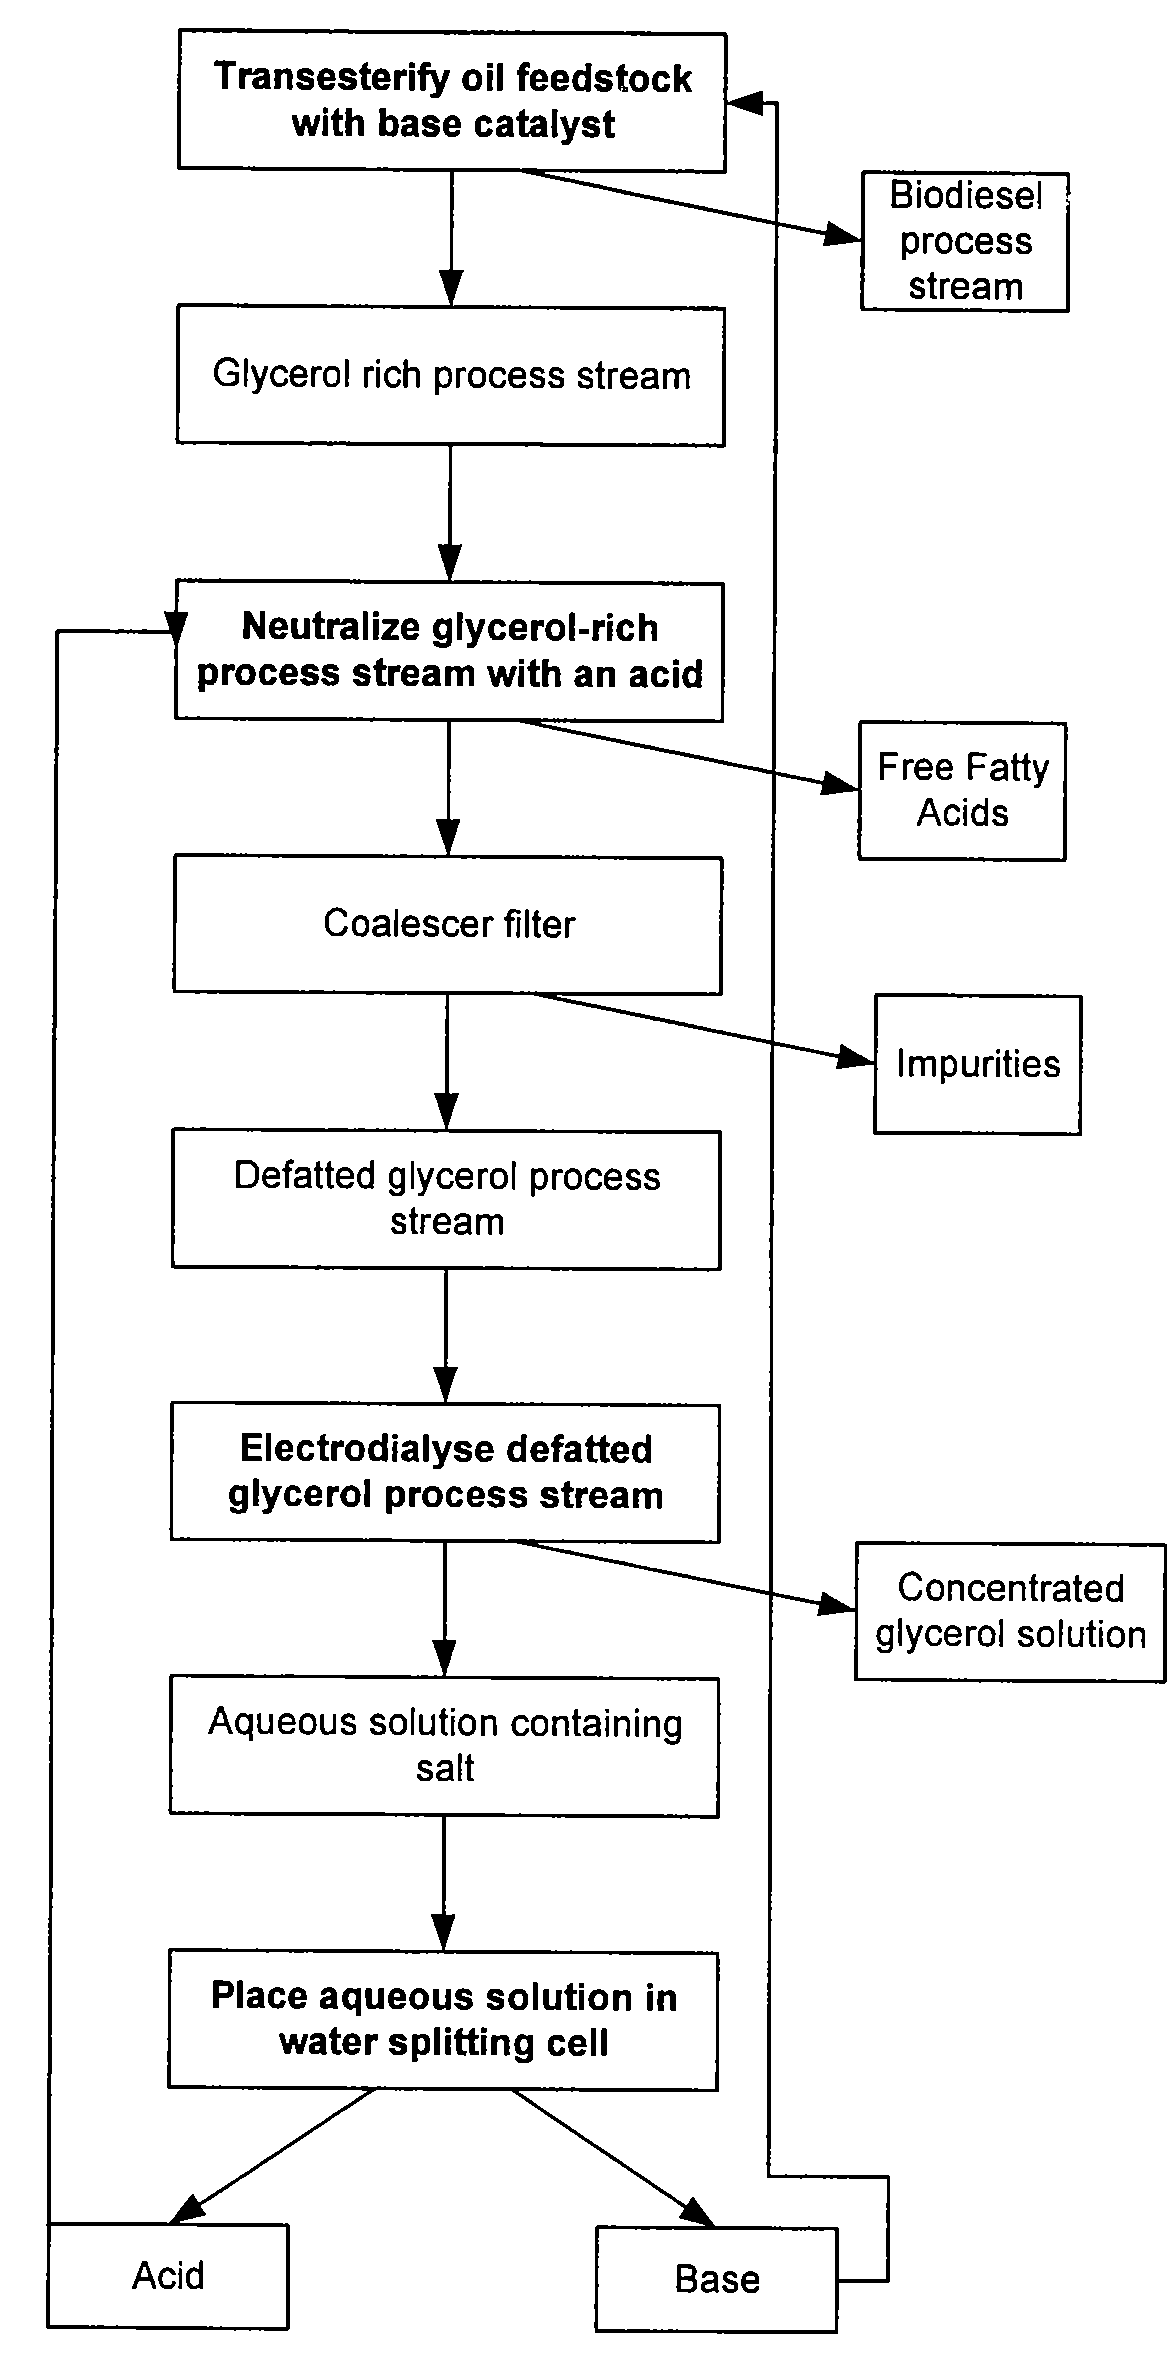 Process for Desalting Glycerol Solutions and Recovery of Chemicals